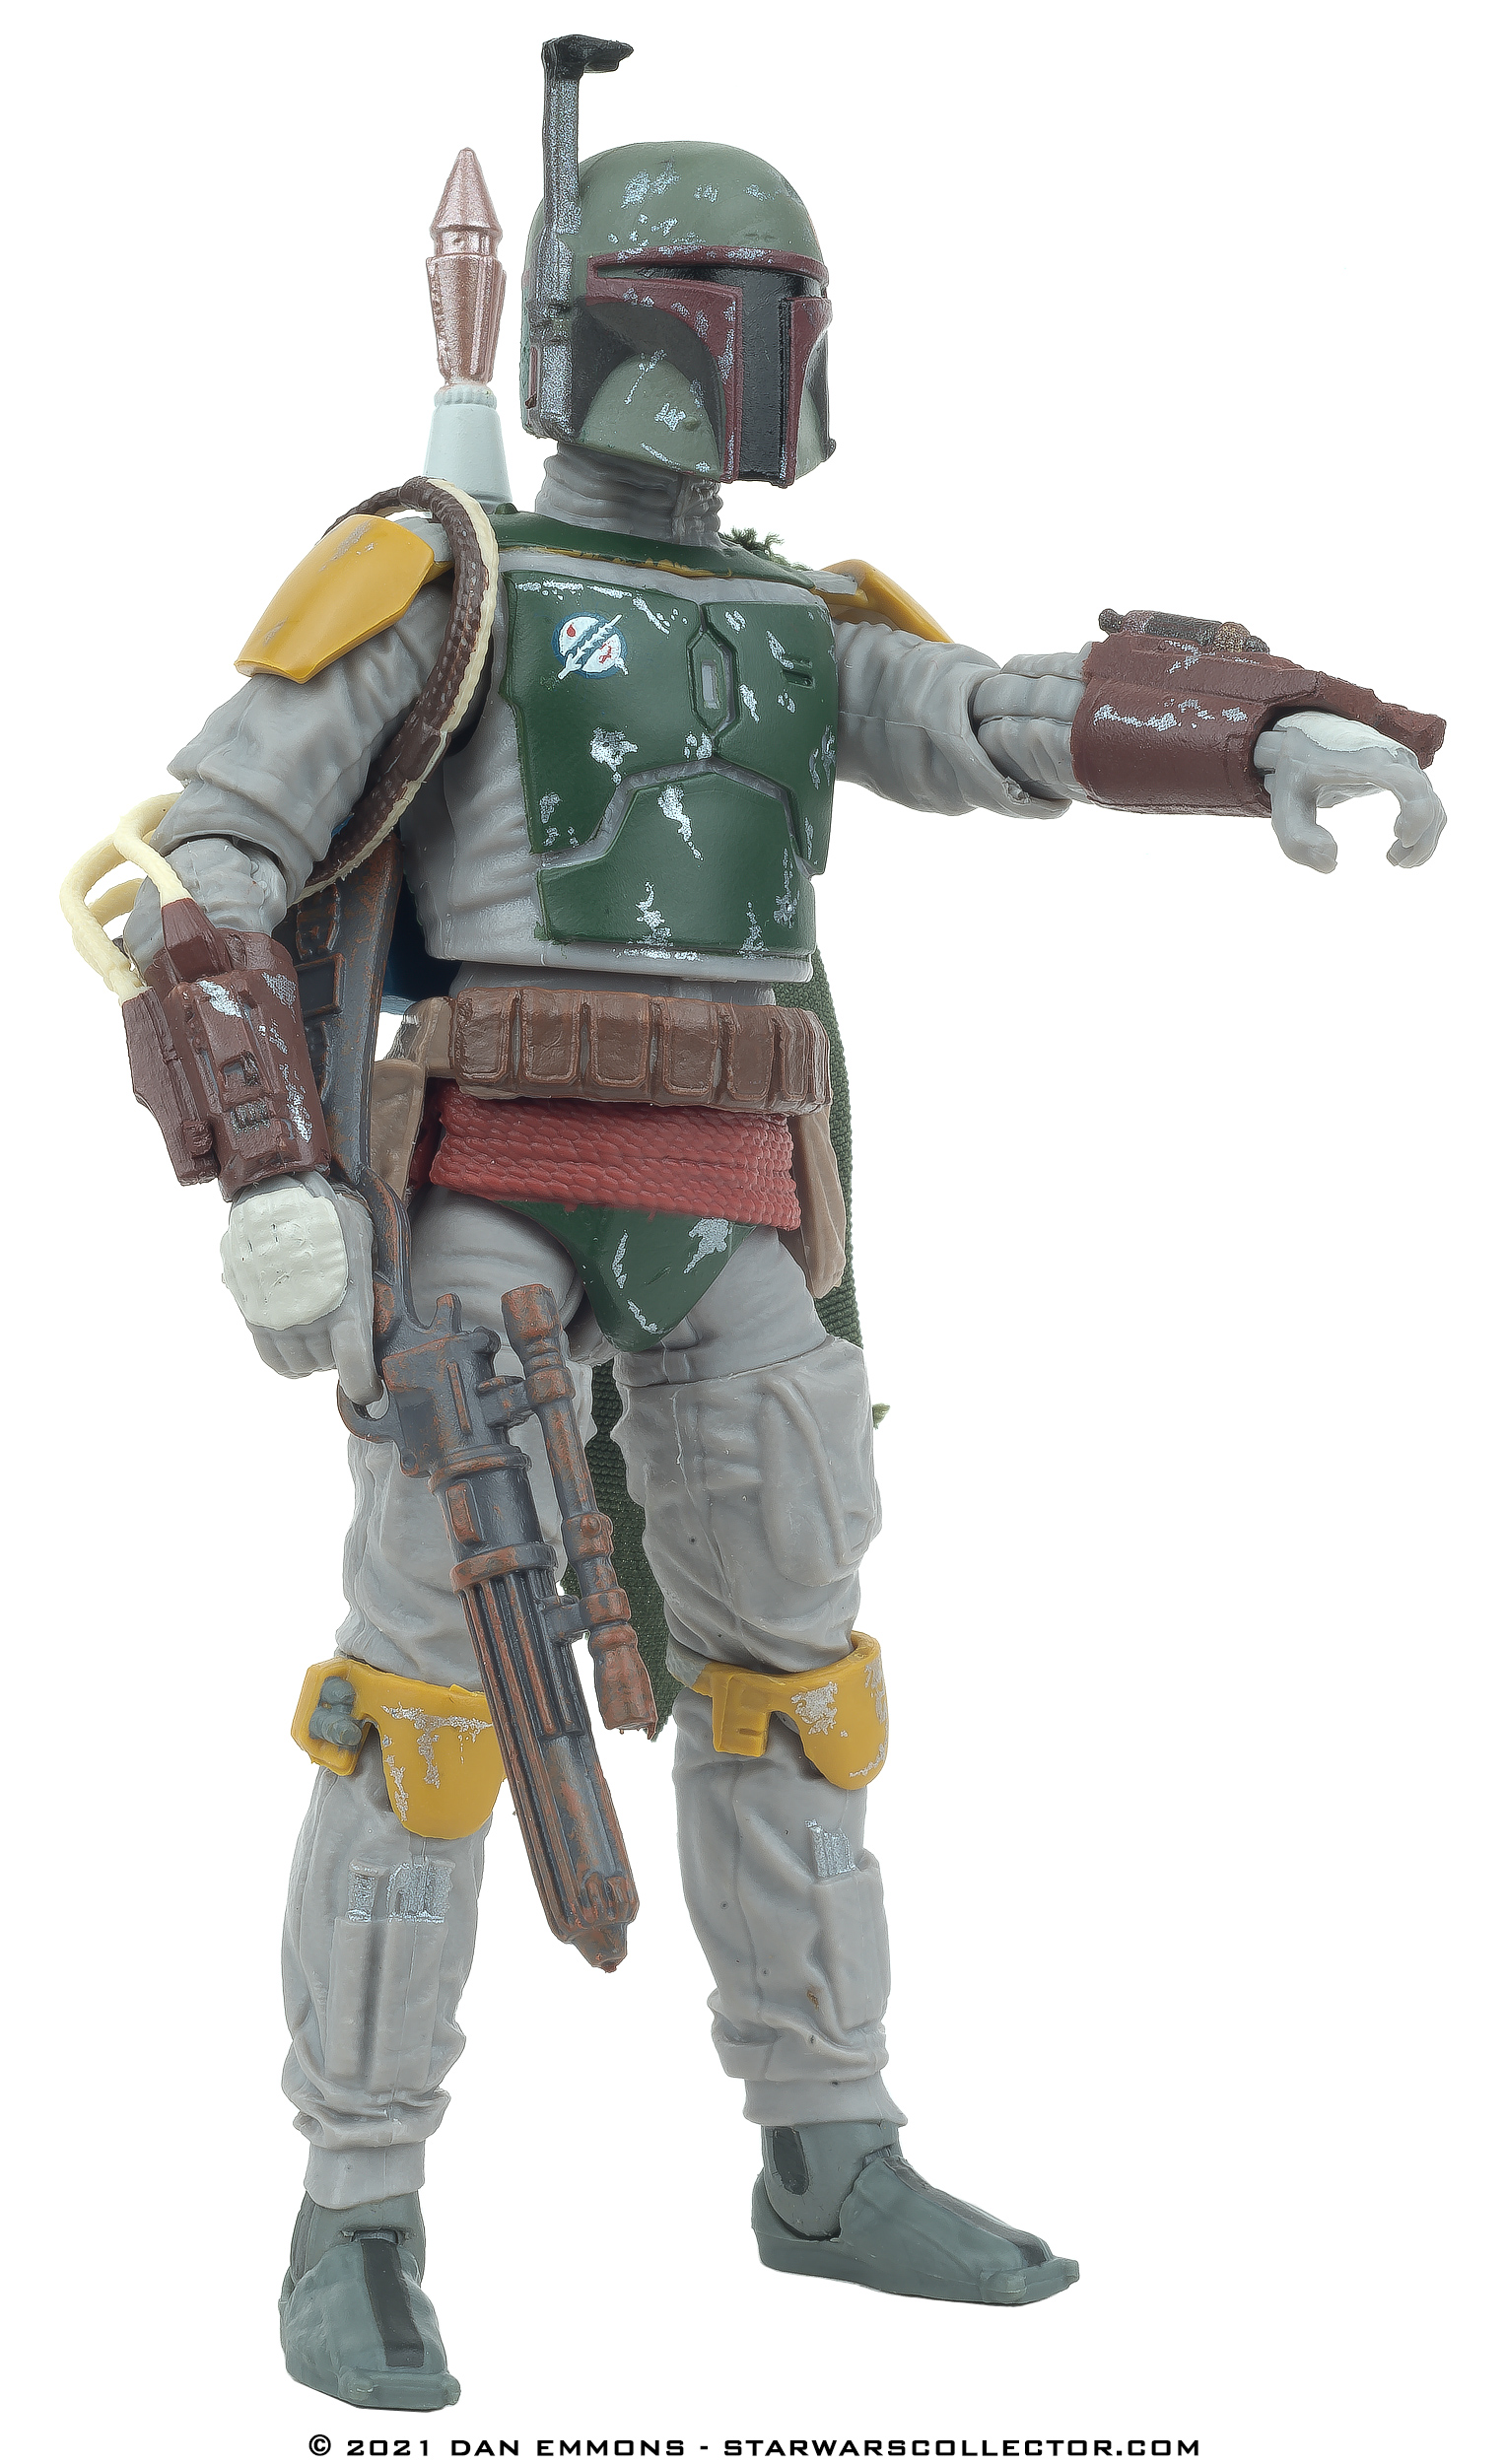 The Vintage Collection VC:186 Boba Fett